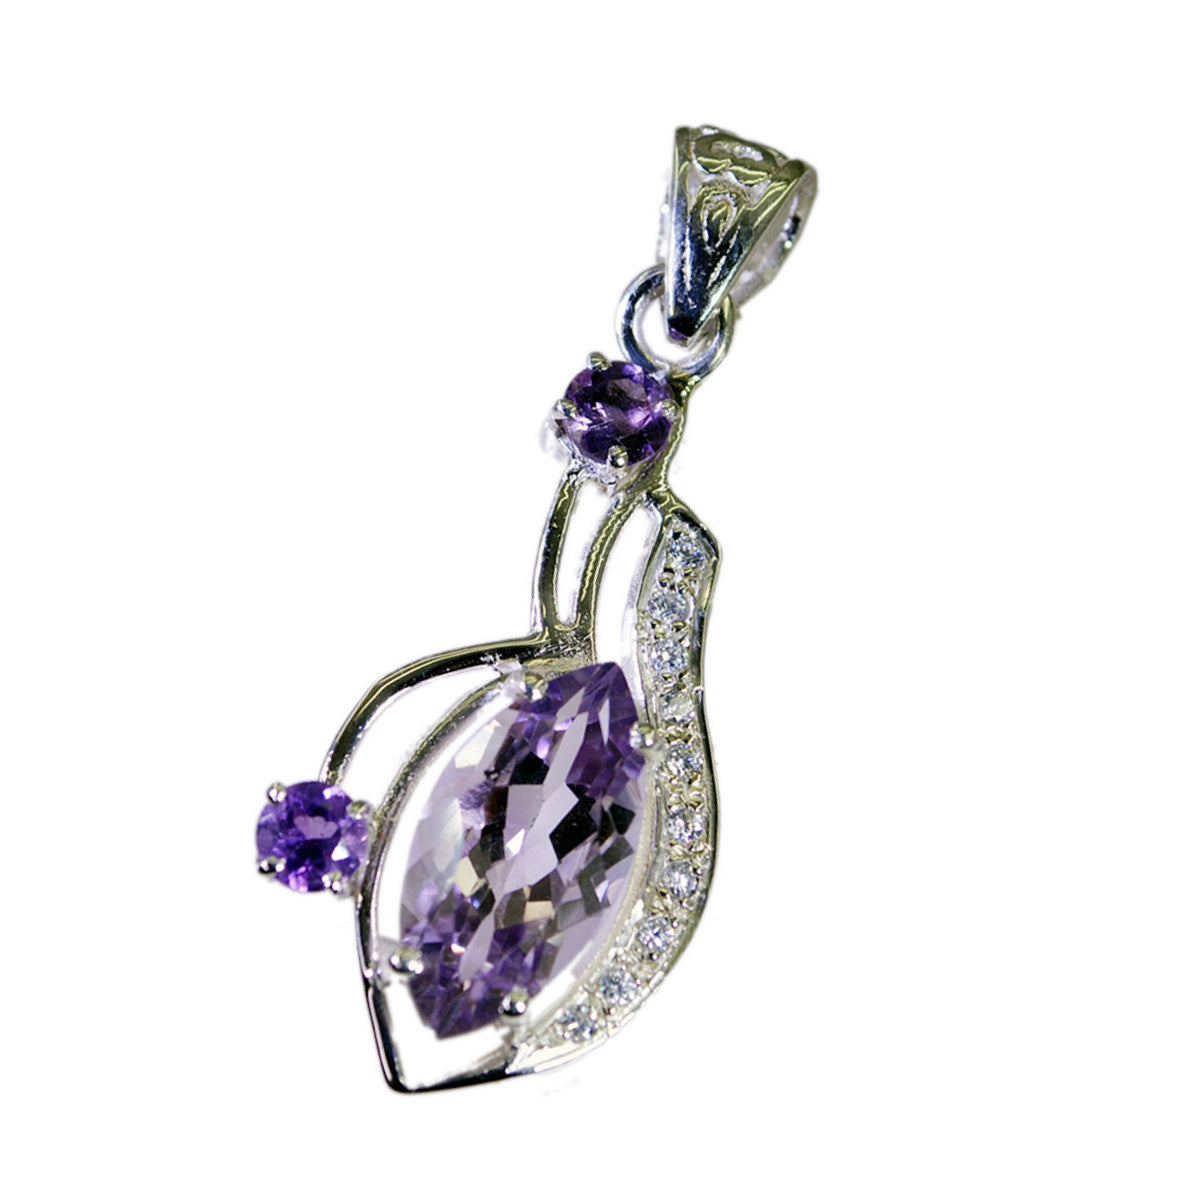 Riyo Handsome Gems Multi Faceted Purple Amethyst Solid Silver Pendant Gift For Easter Sunday